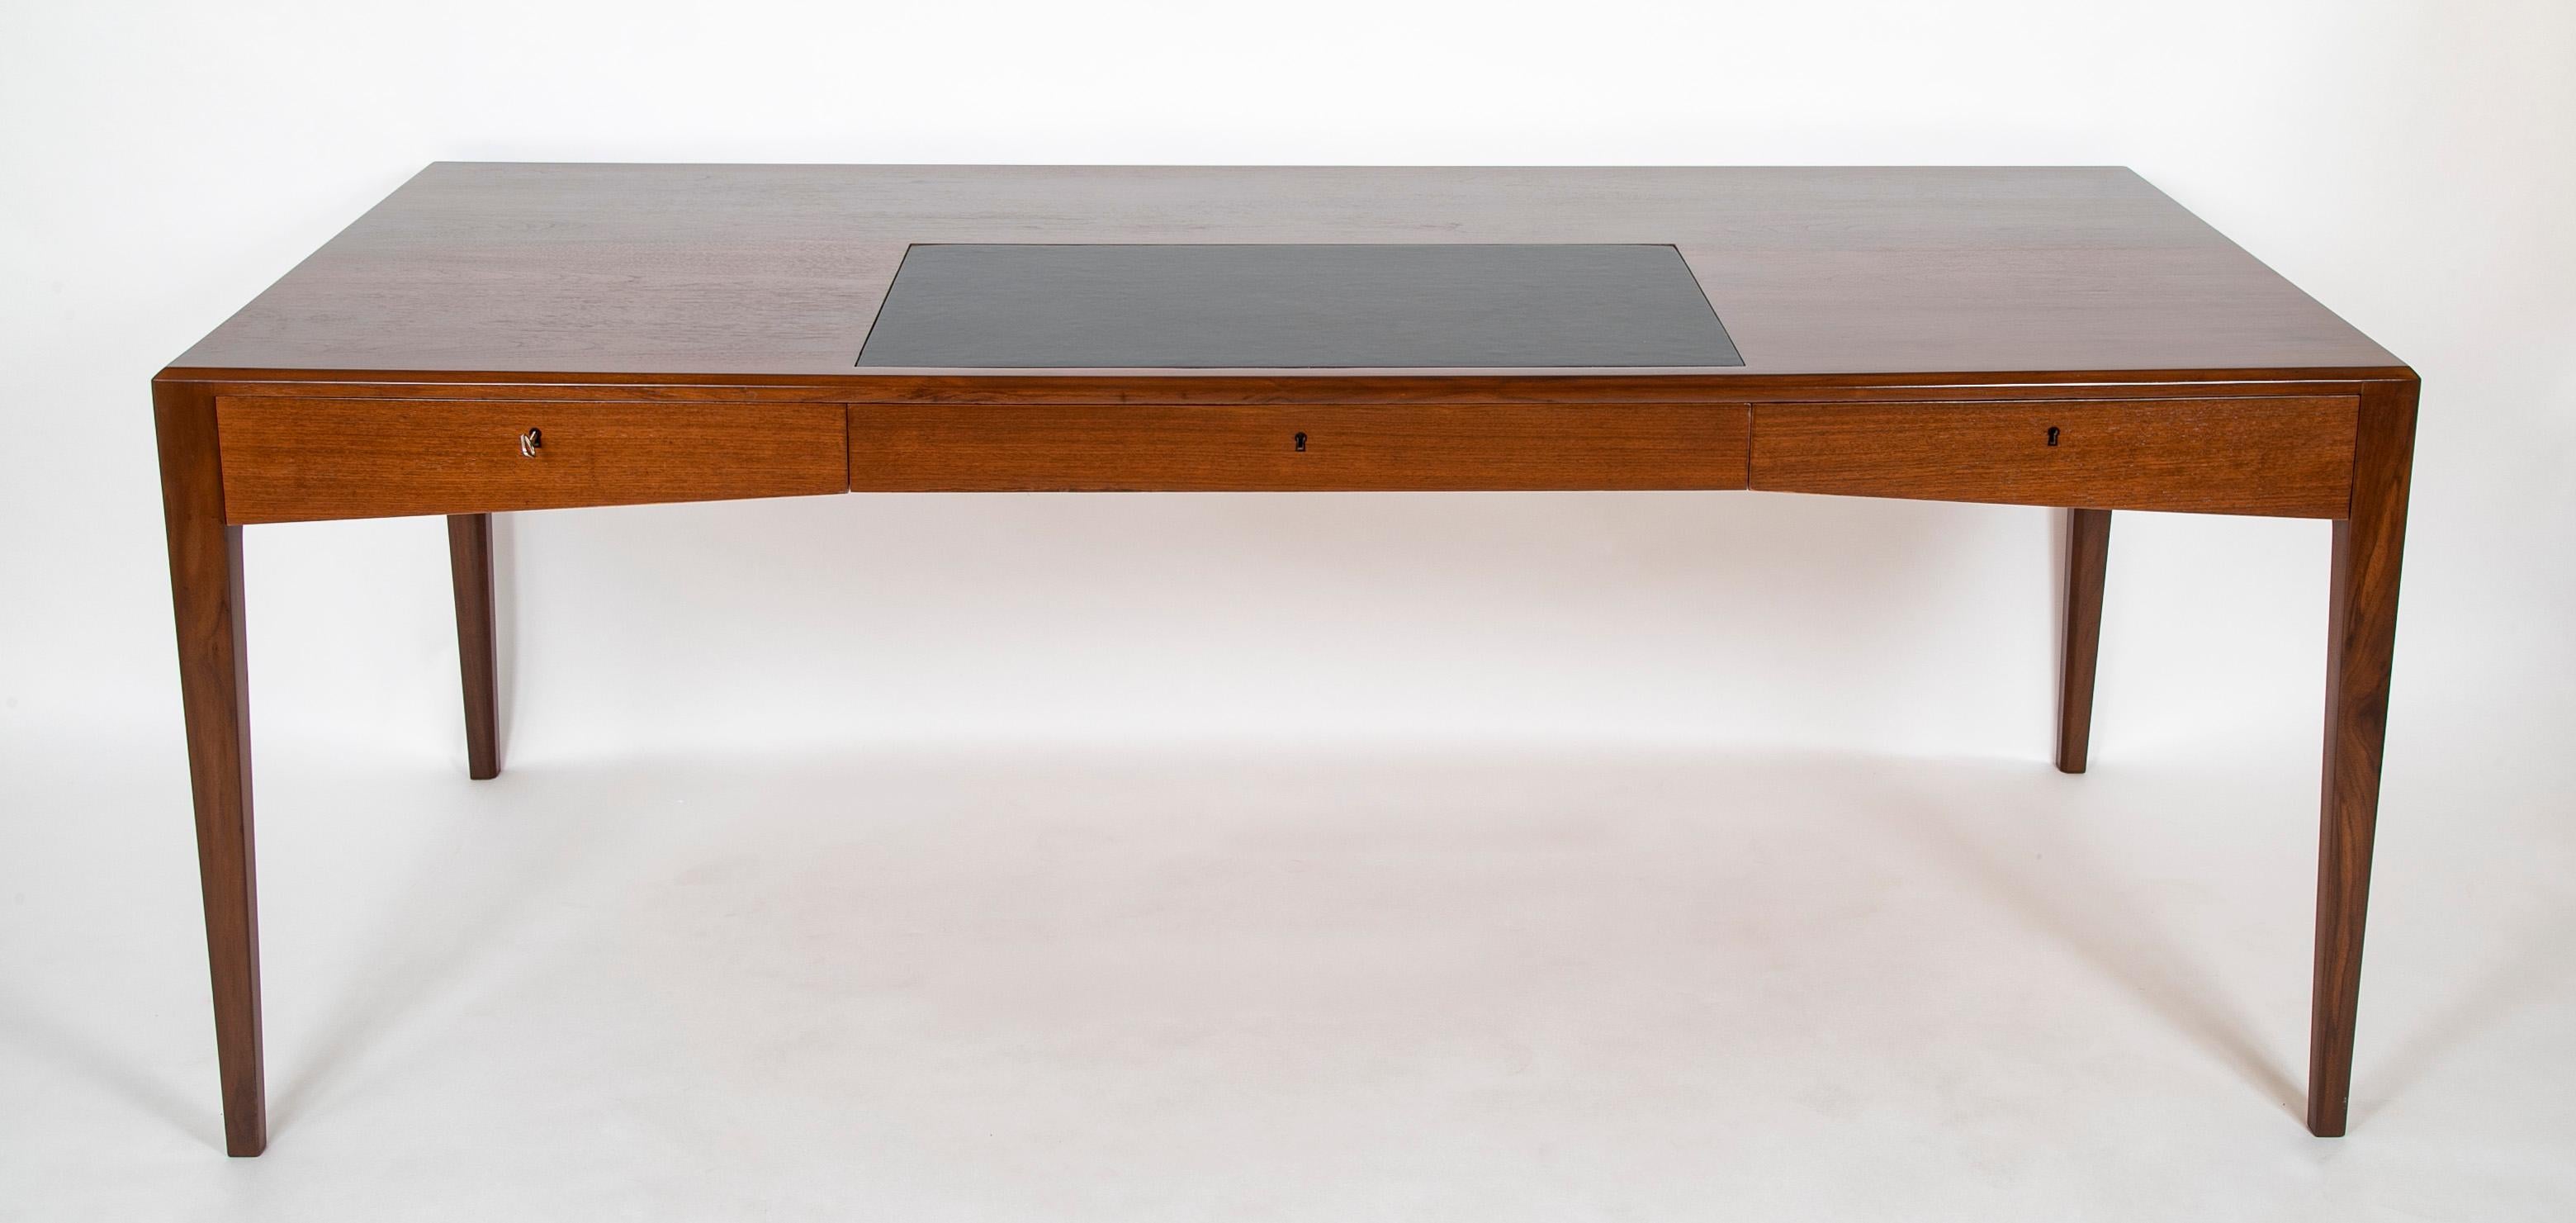 A striking Danish Teak desk designed by Severin Hansen, with great proportions and characteristic seamless joinery. Sleek silhouette.